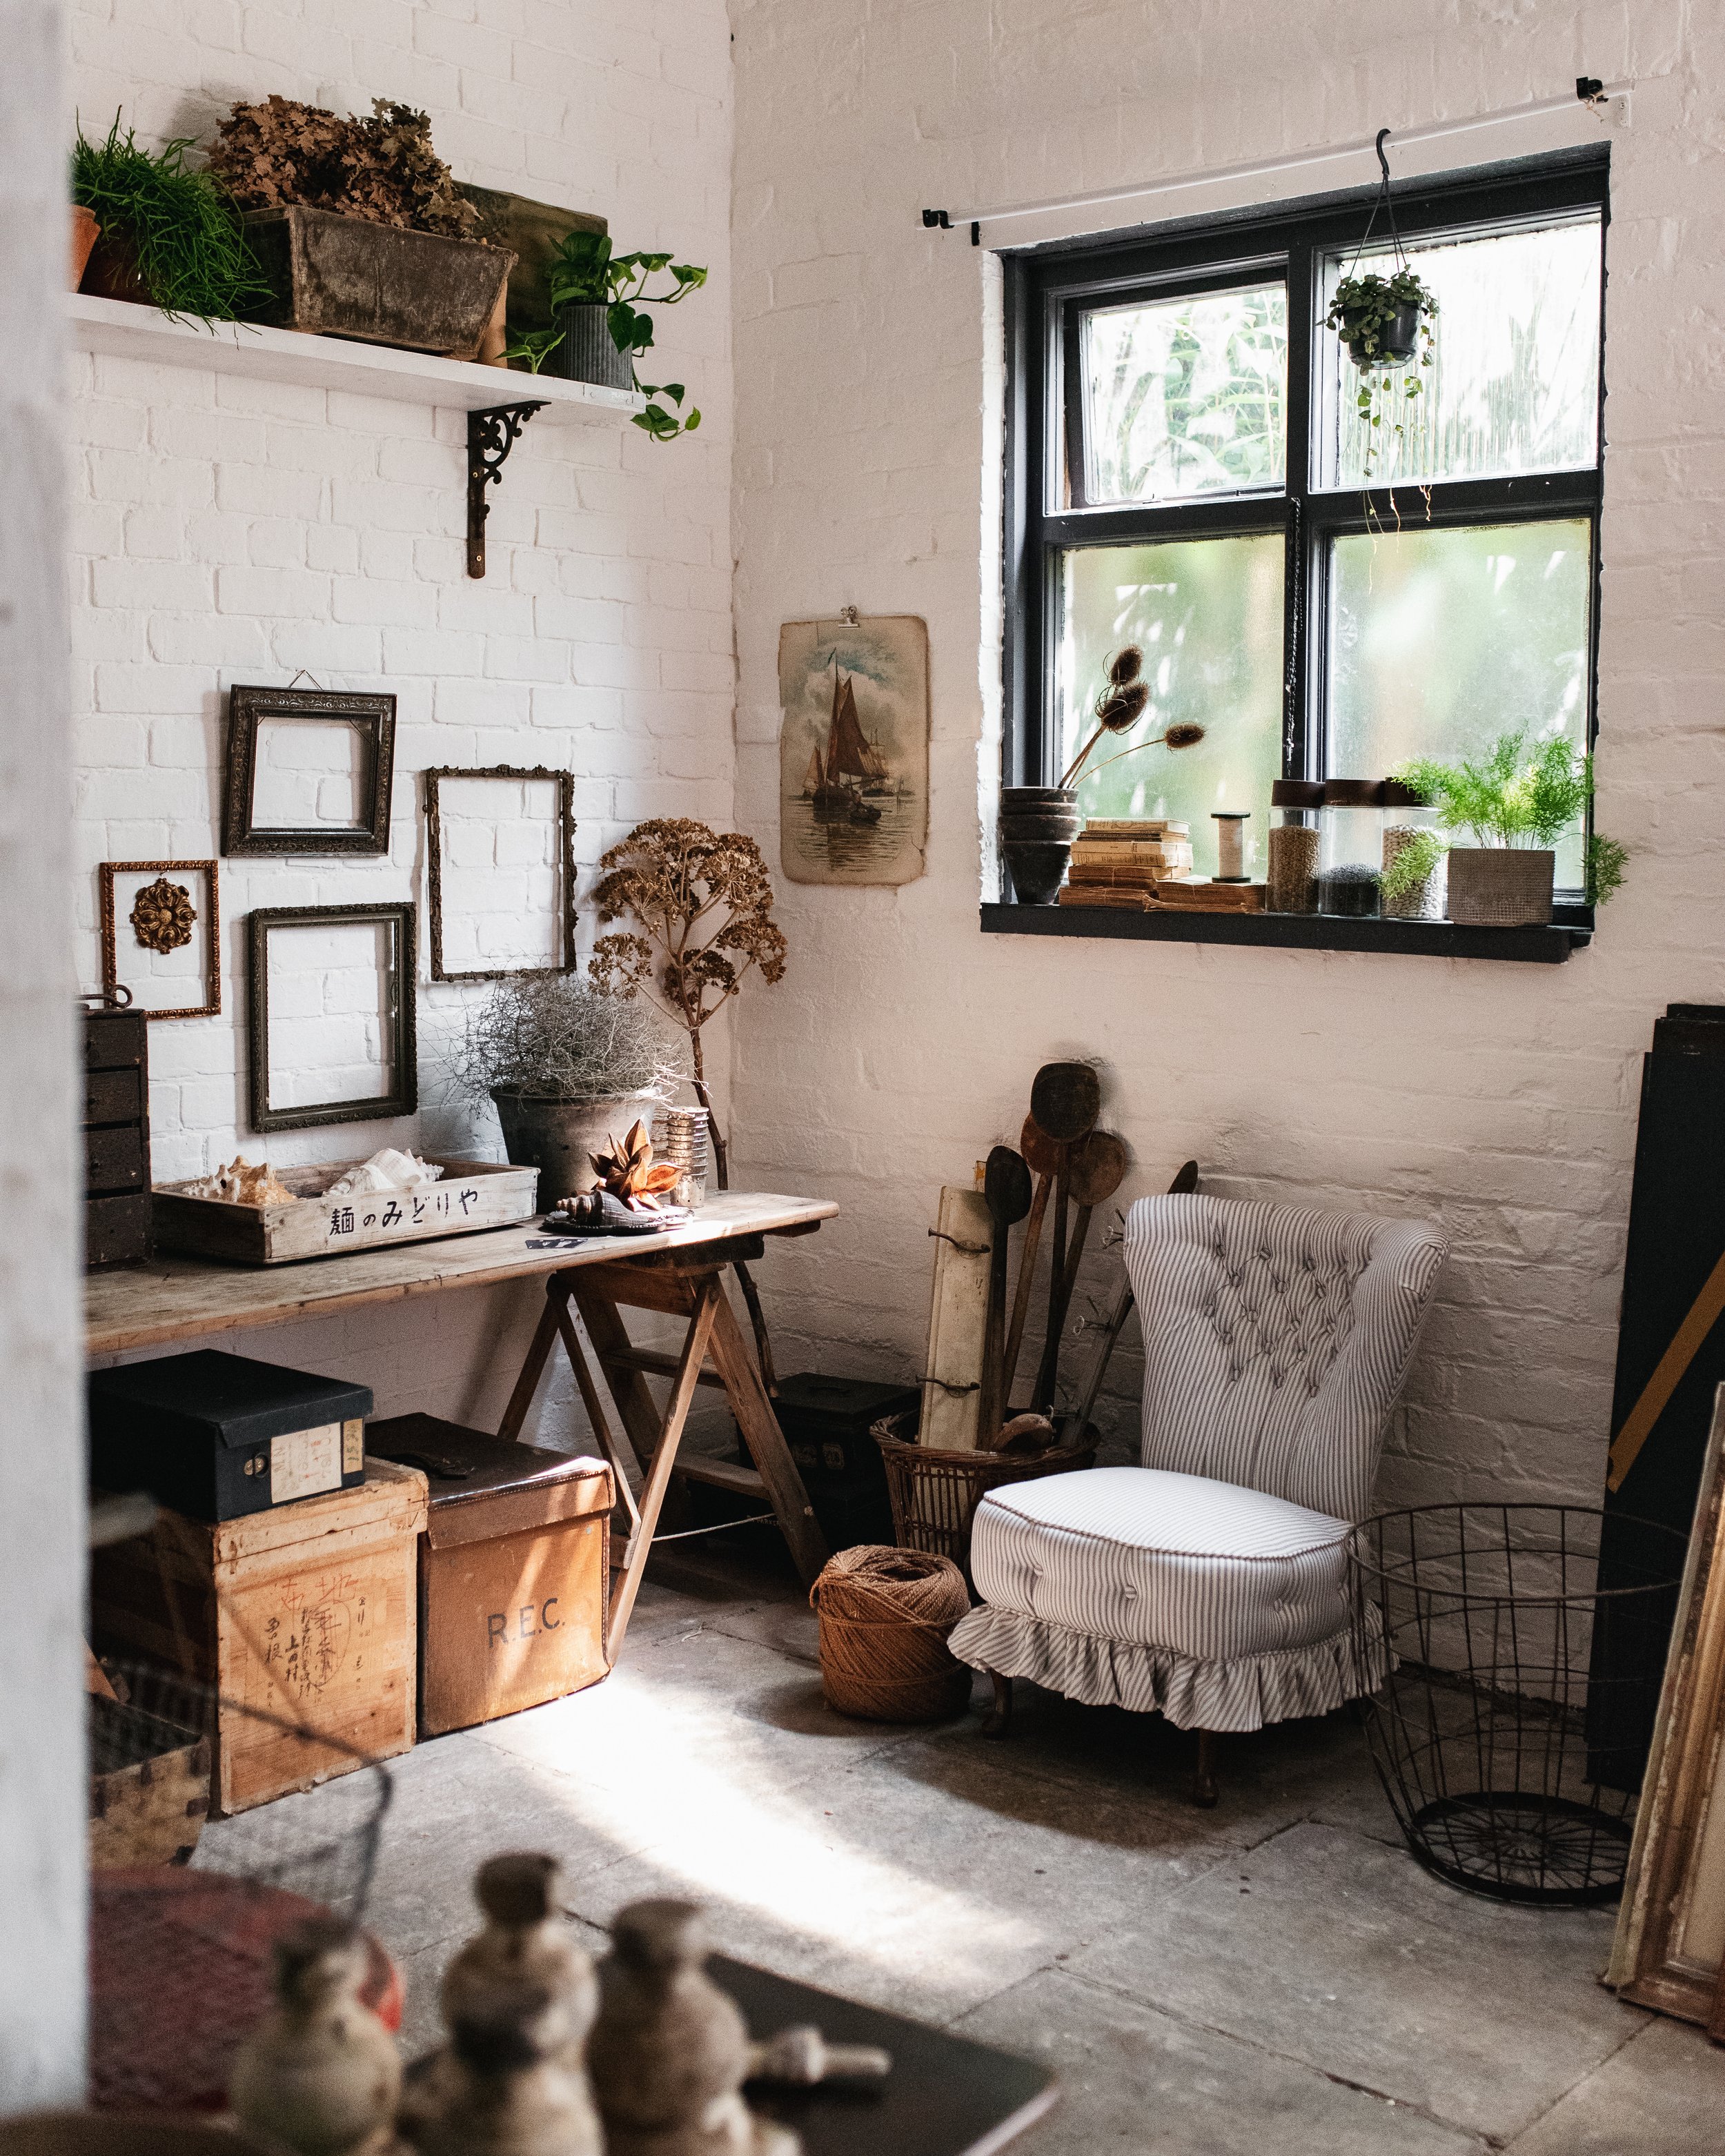 Studio space of vintage seller filled with beautiful old items